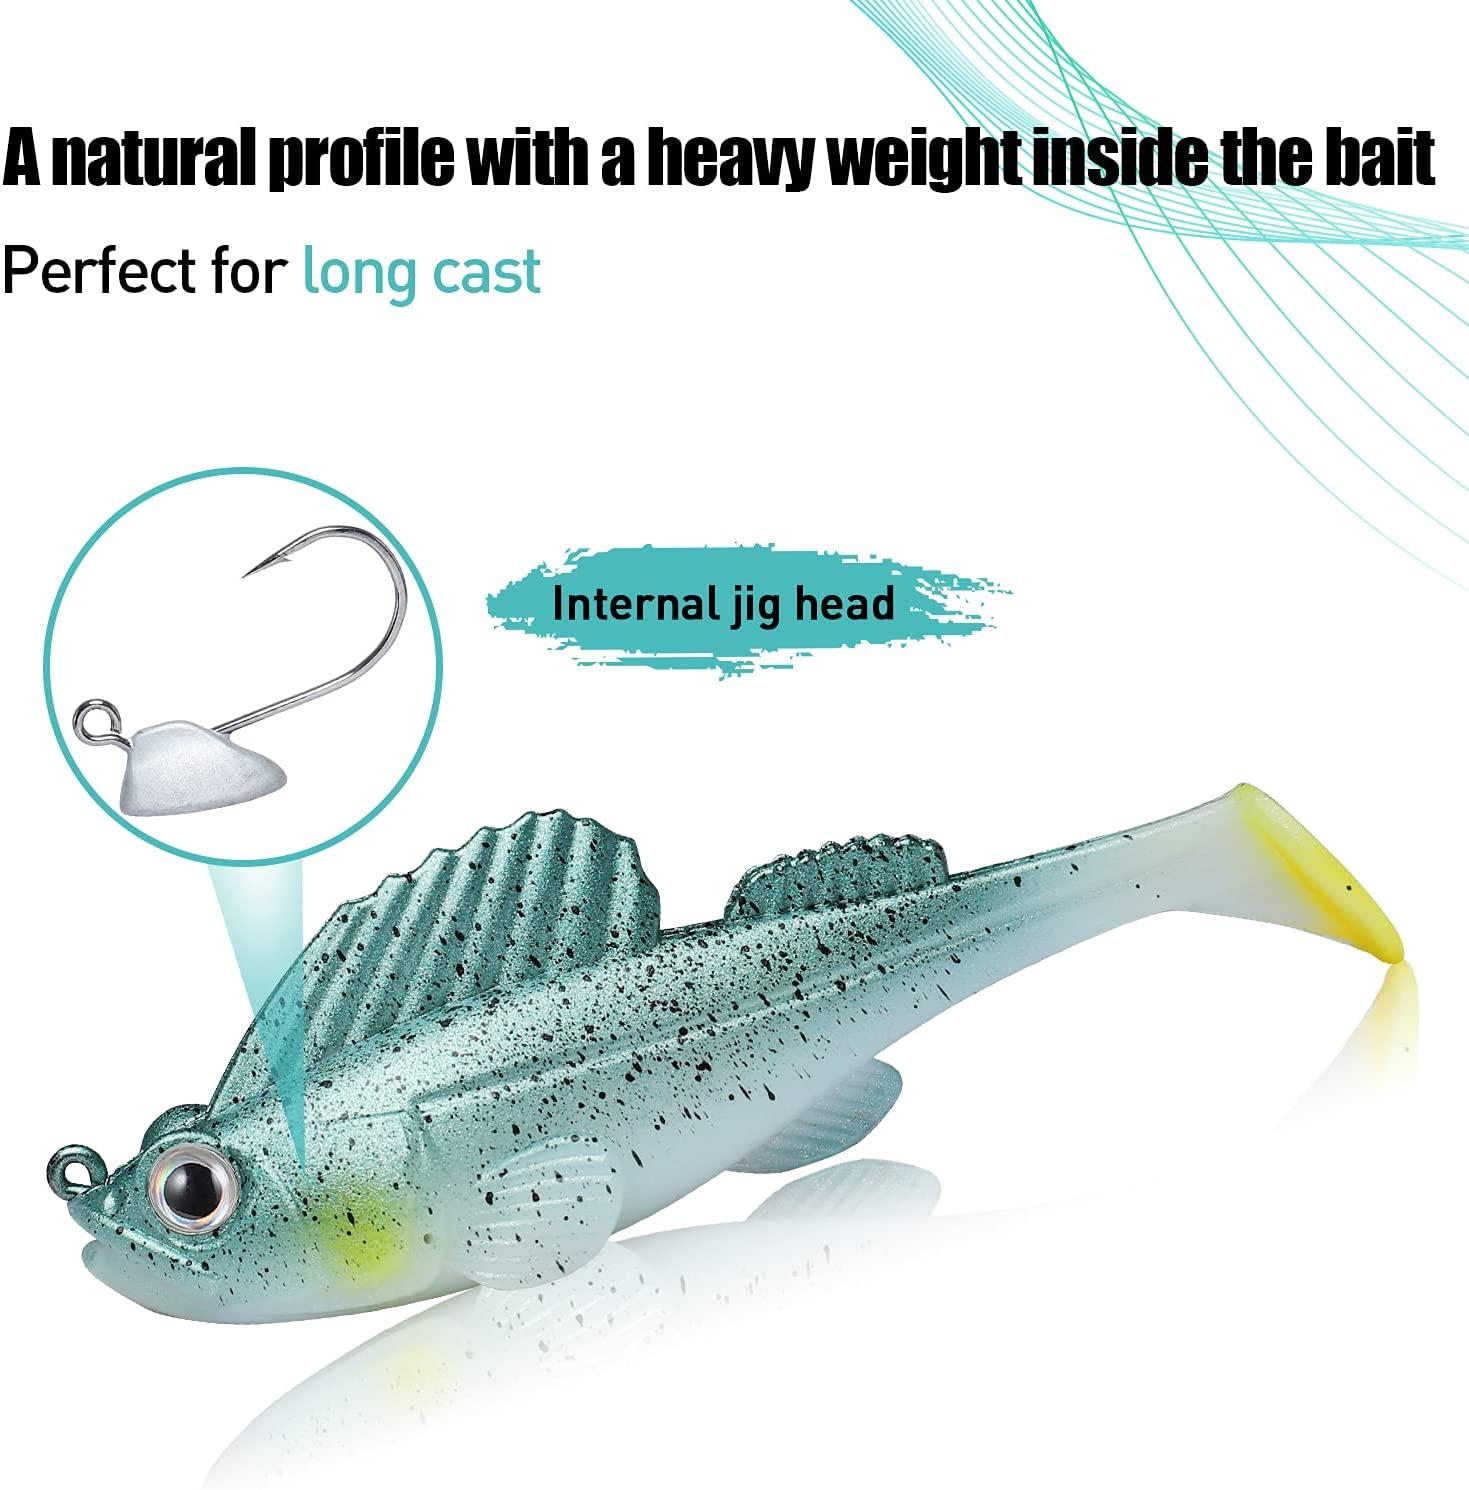 Buy TRUSCENDPre-Rigged Jig Head Soft Fishing Lures, Paddle Tail